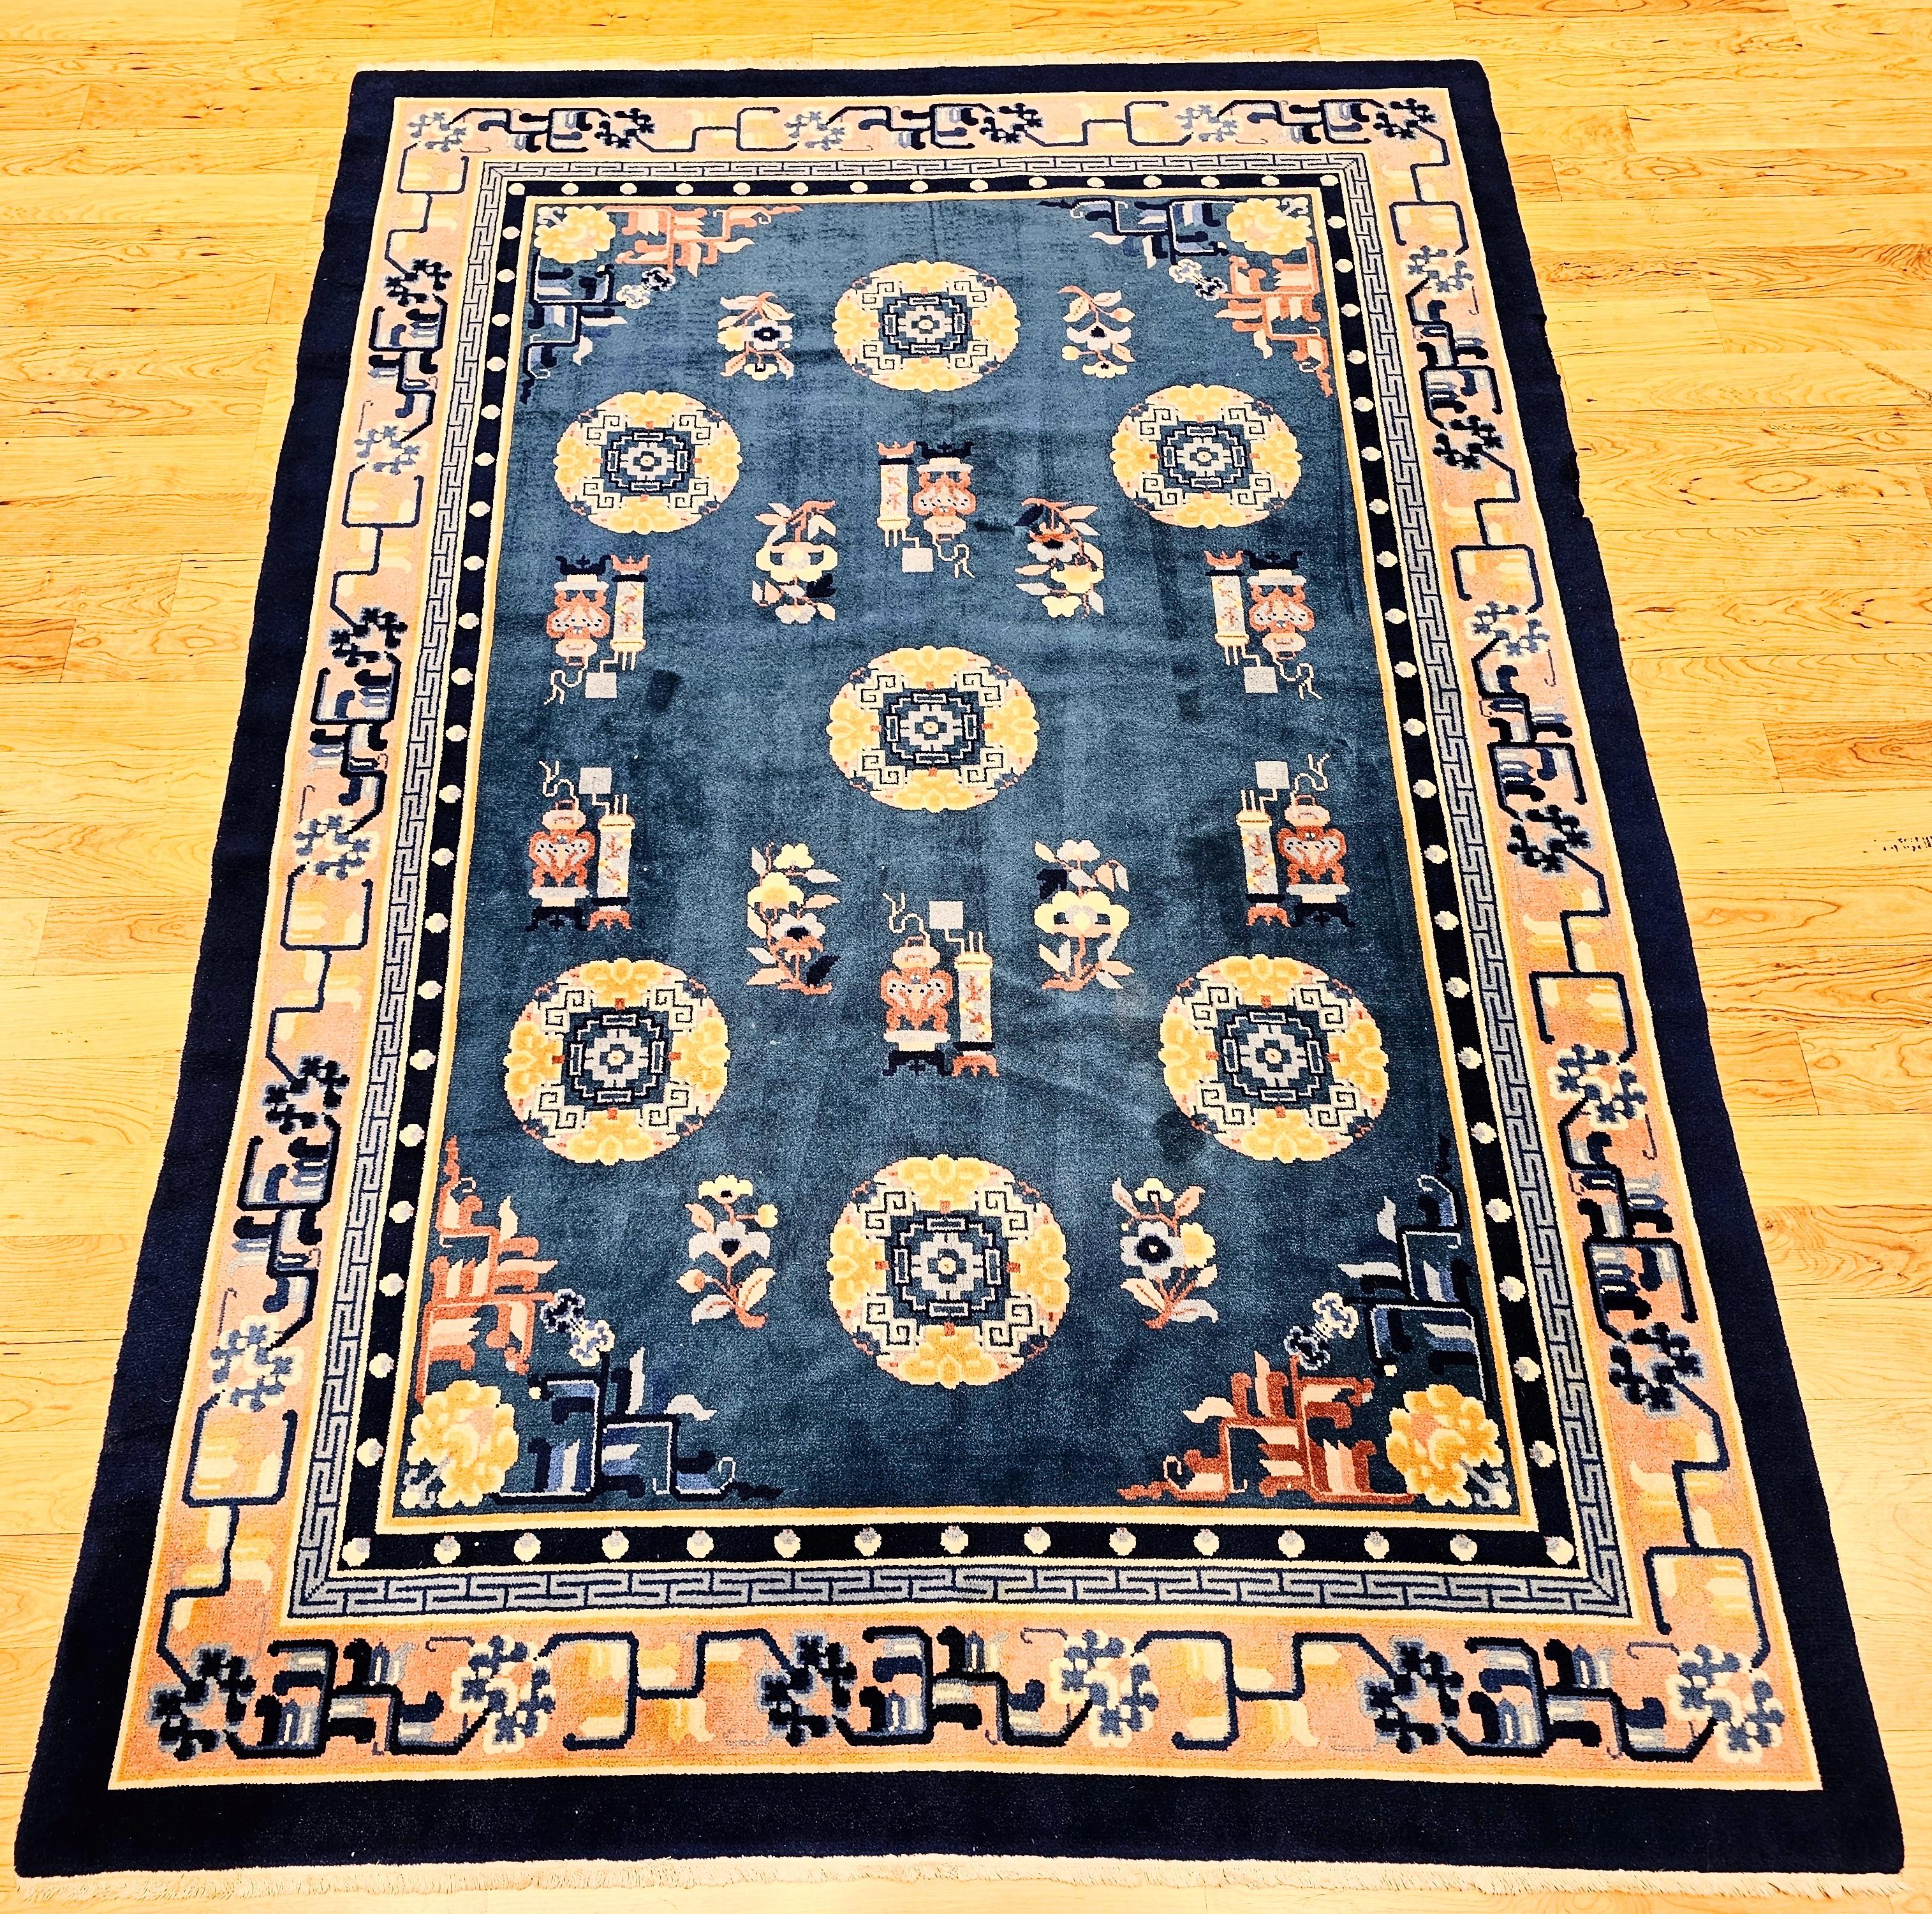 Beautiful Art Deco style Chinese rug from the mid 1900s with a French blue background and a pale pink and blue color  border.  The design of this rug resembles the 18th 19th century Ningxia carpets with similar lattice and lotus design.  Also, the